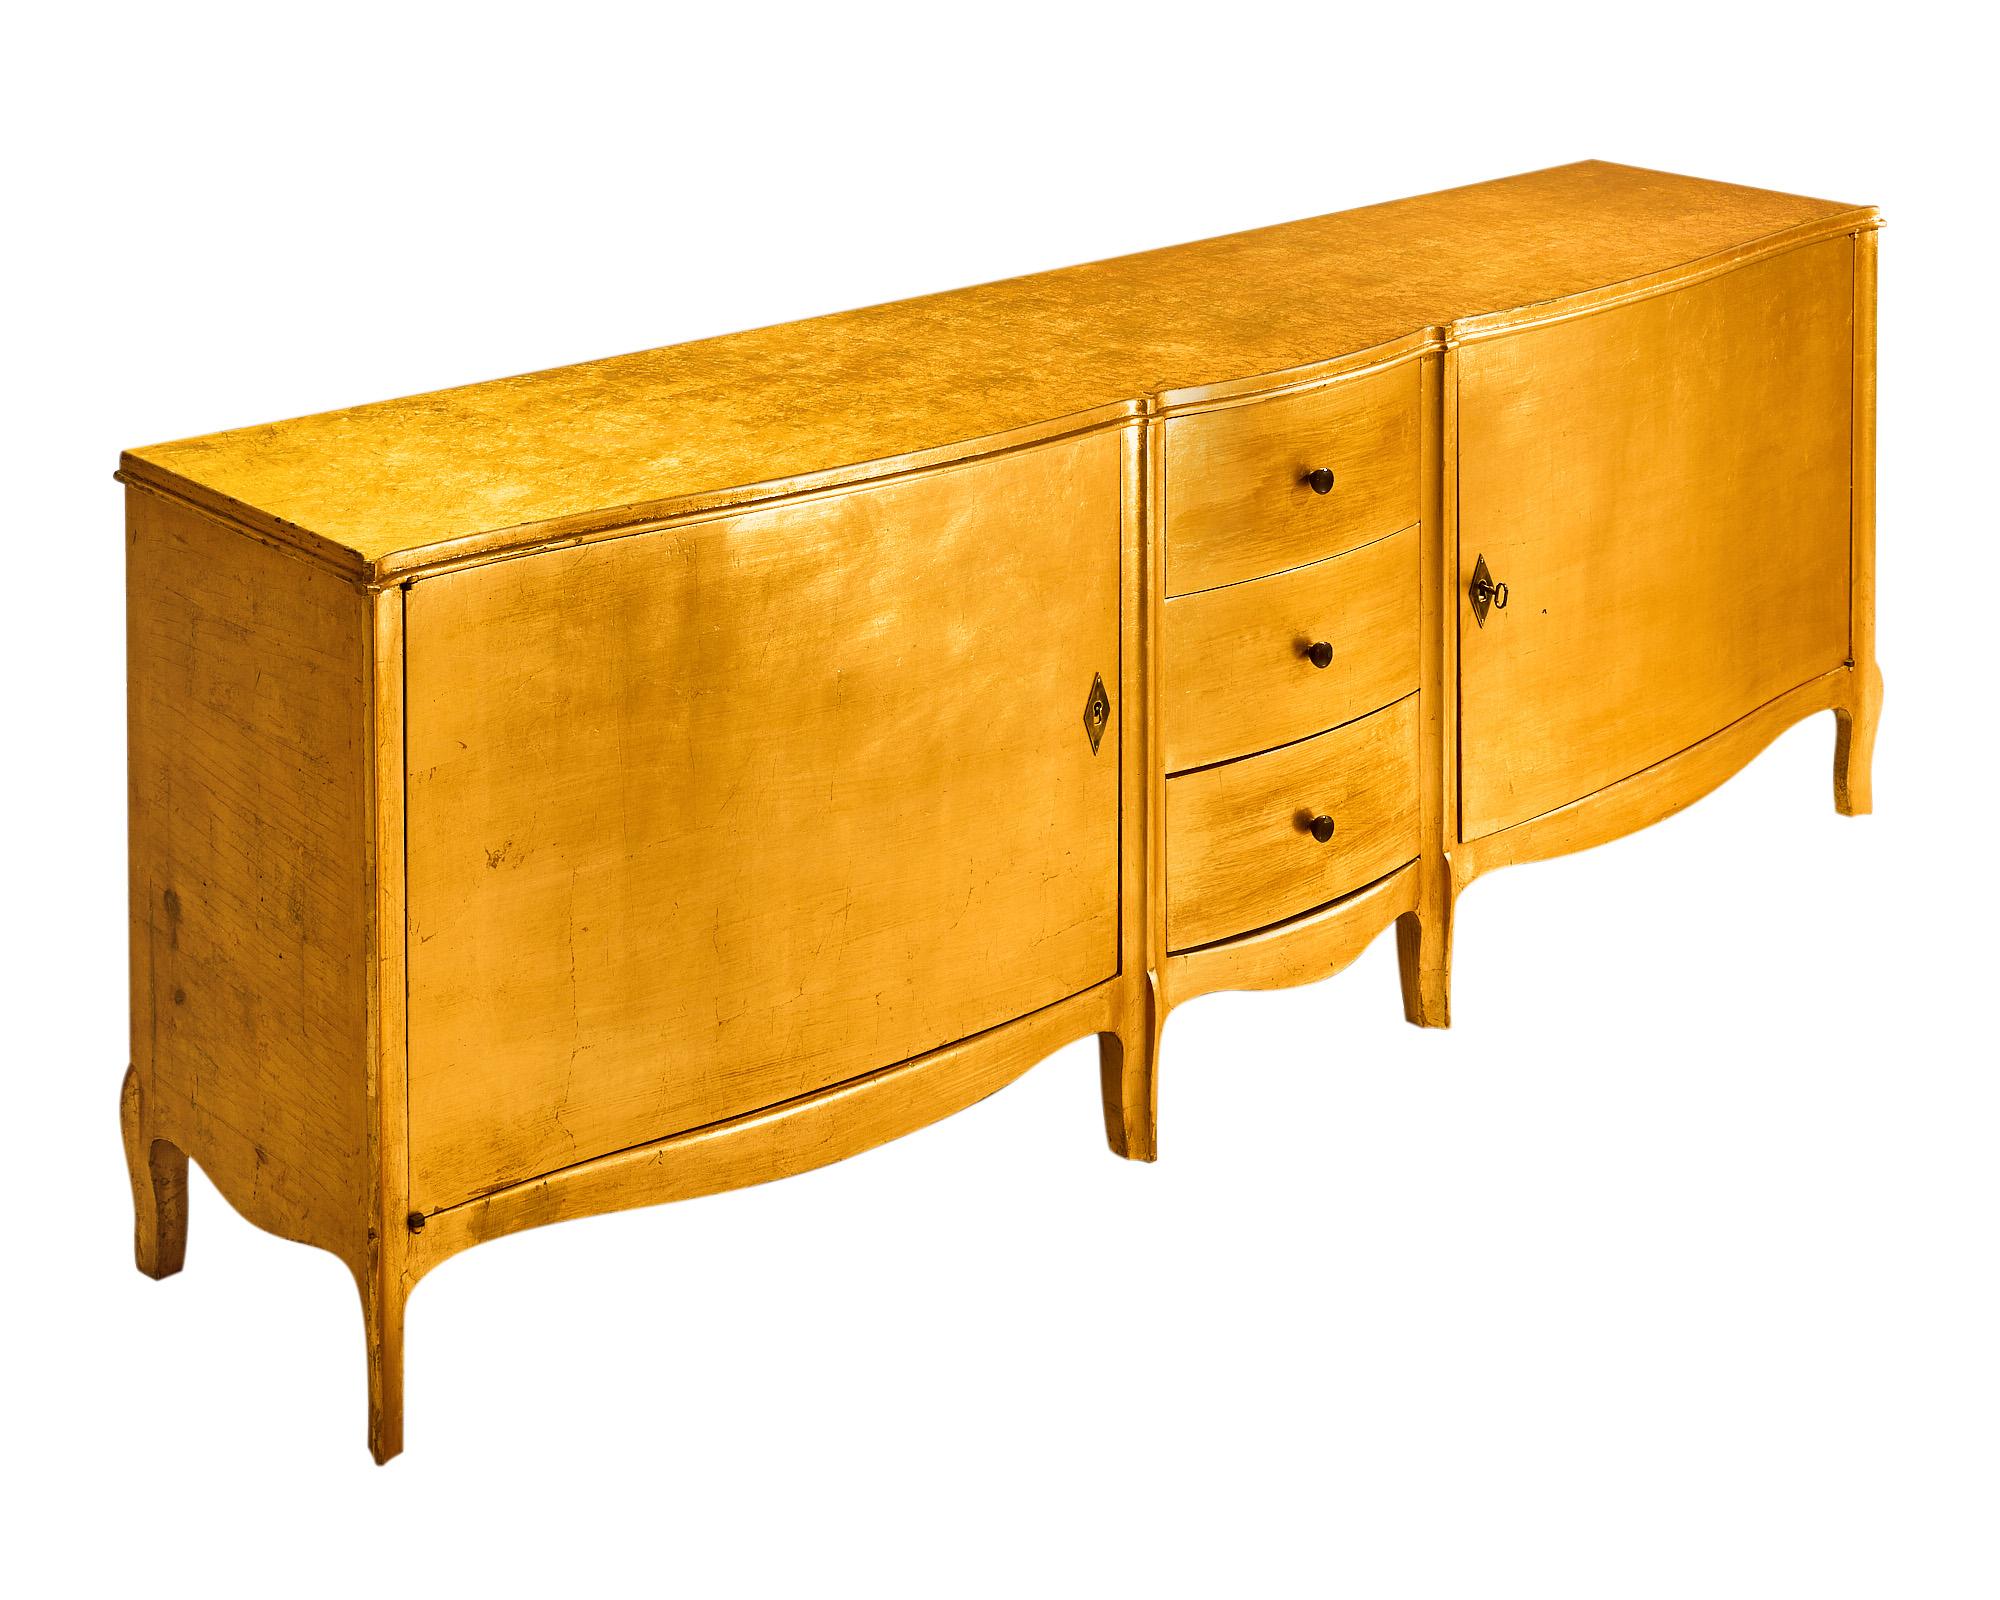 French Art Deco Period Buffet in the Manner of Maison Jansen For Sale